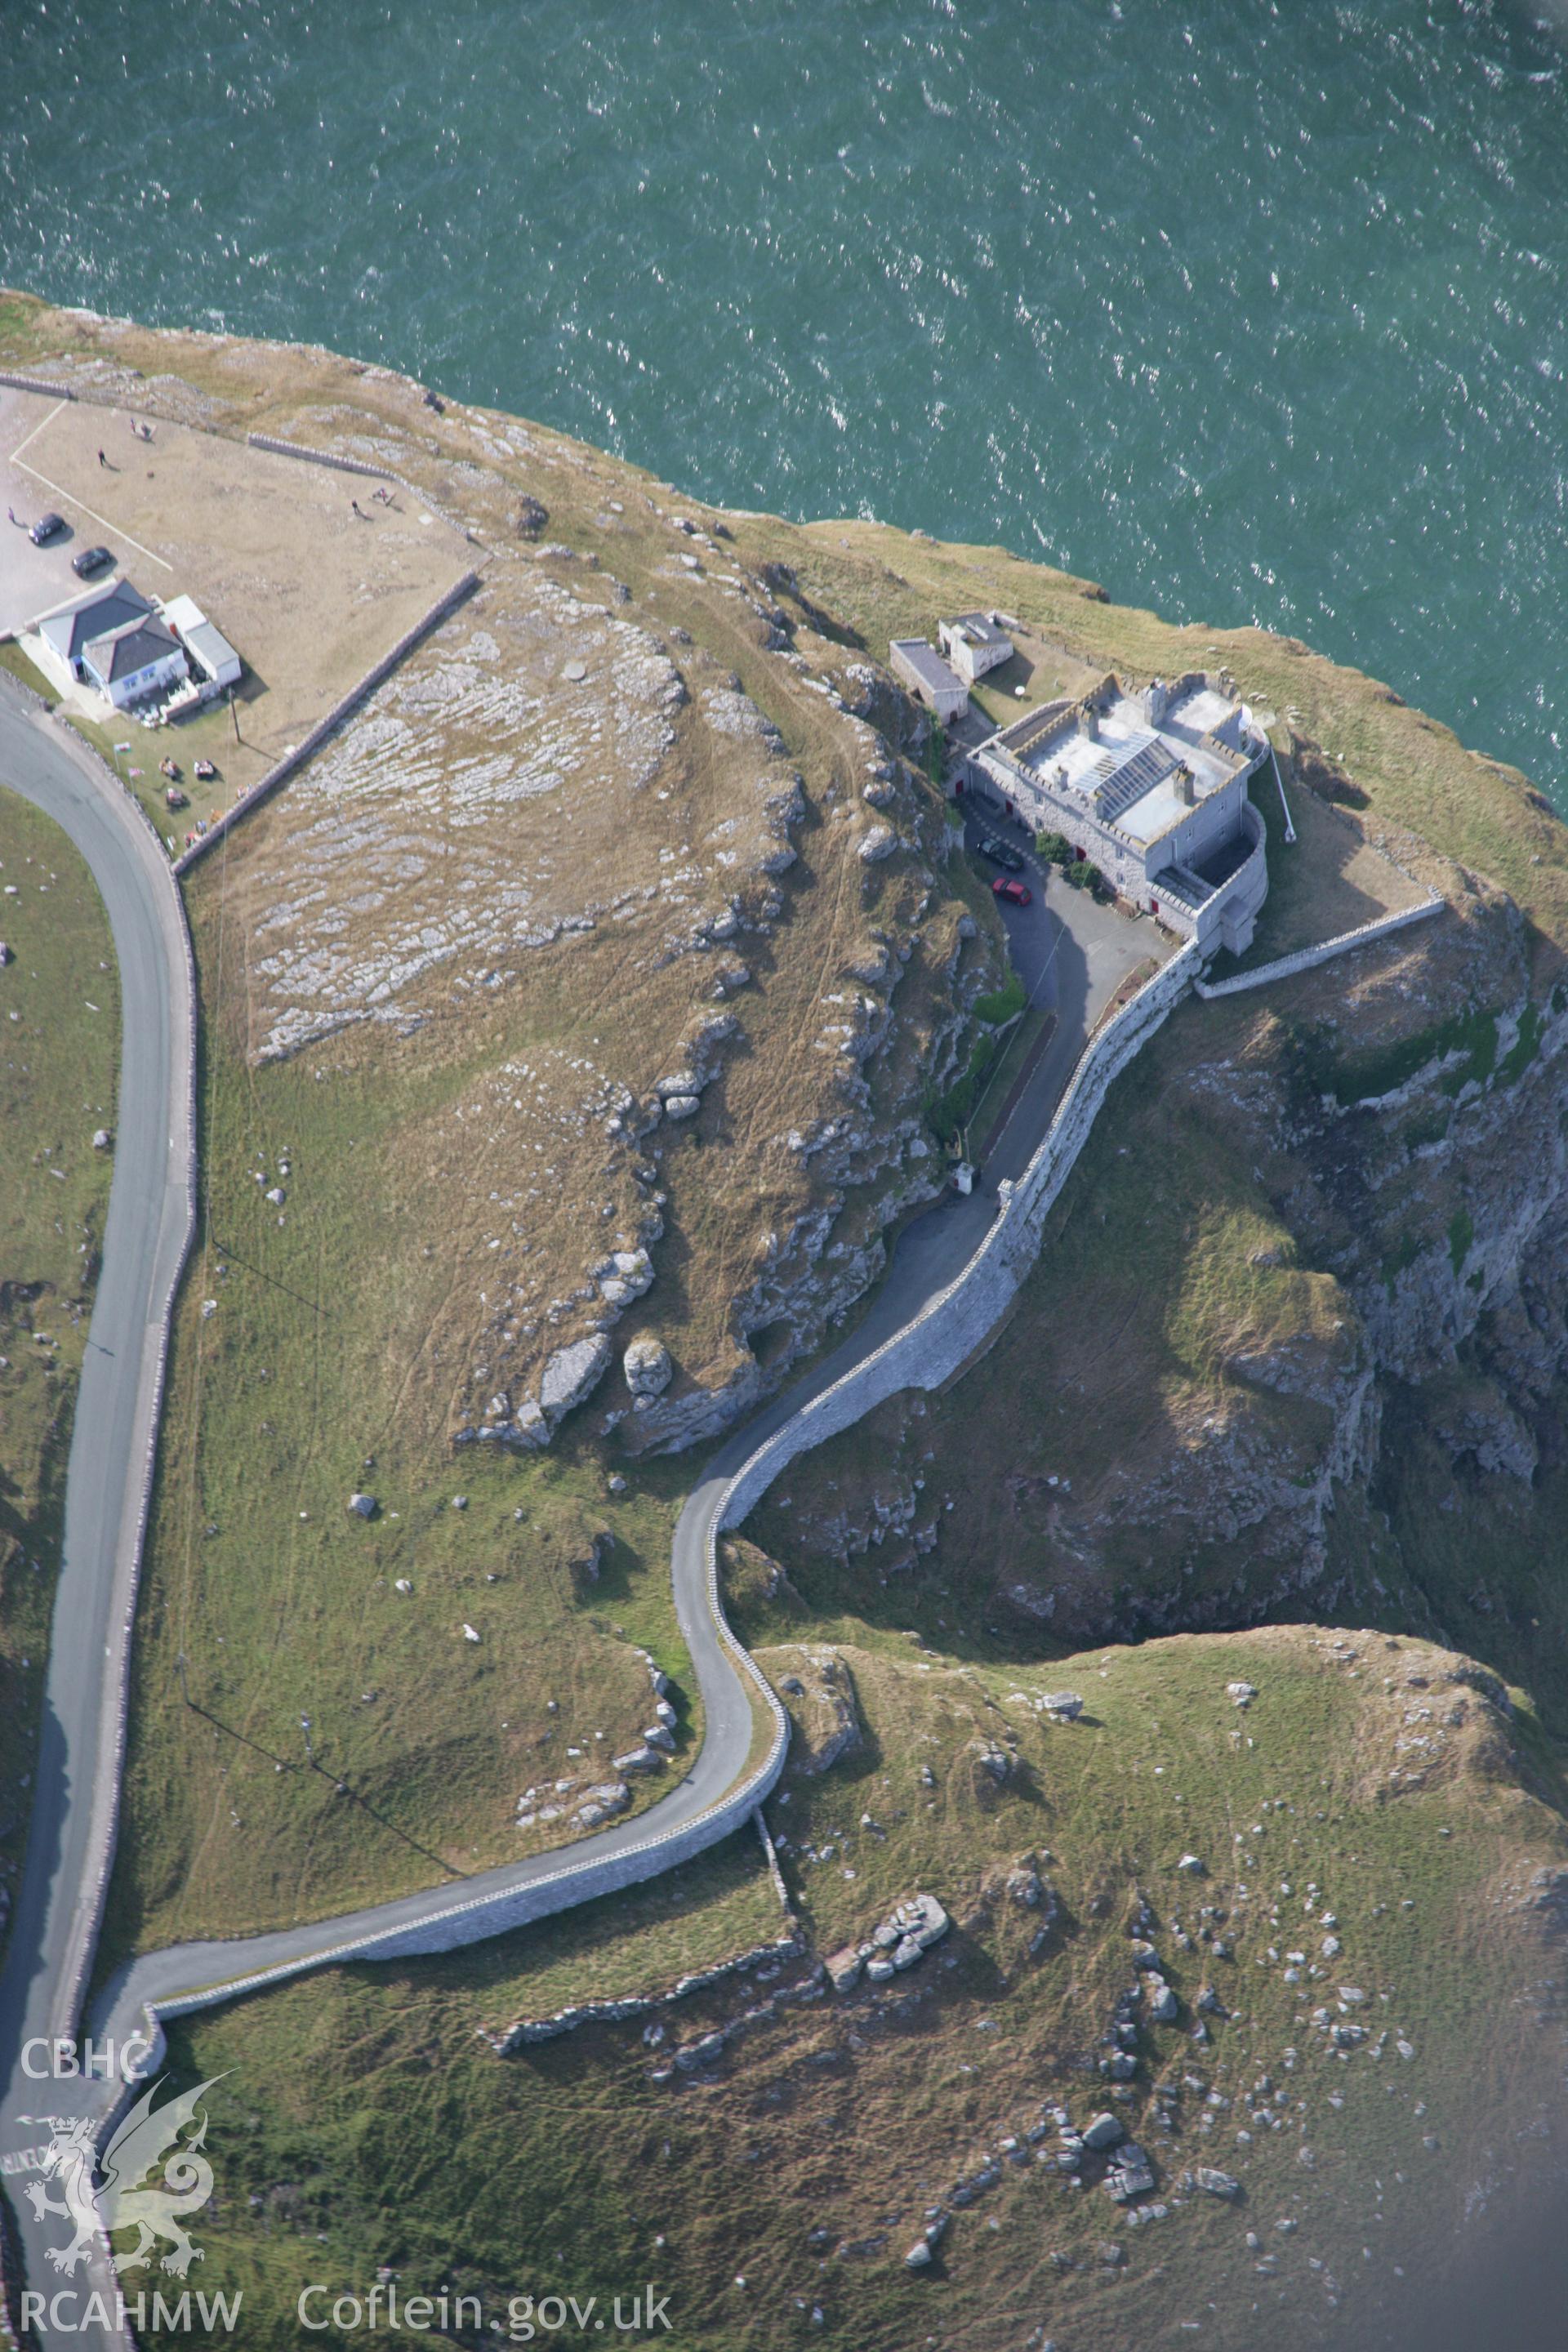 RCAHMW colour oblique aerial photograph of Great Ormes Head Light House. Taken on 14 August 2006 by Toby Driver.